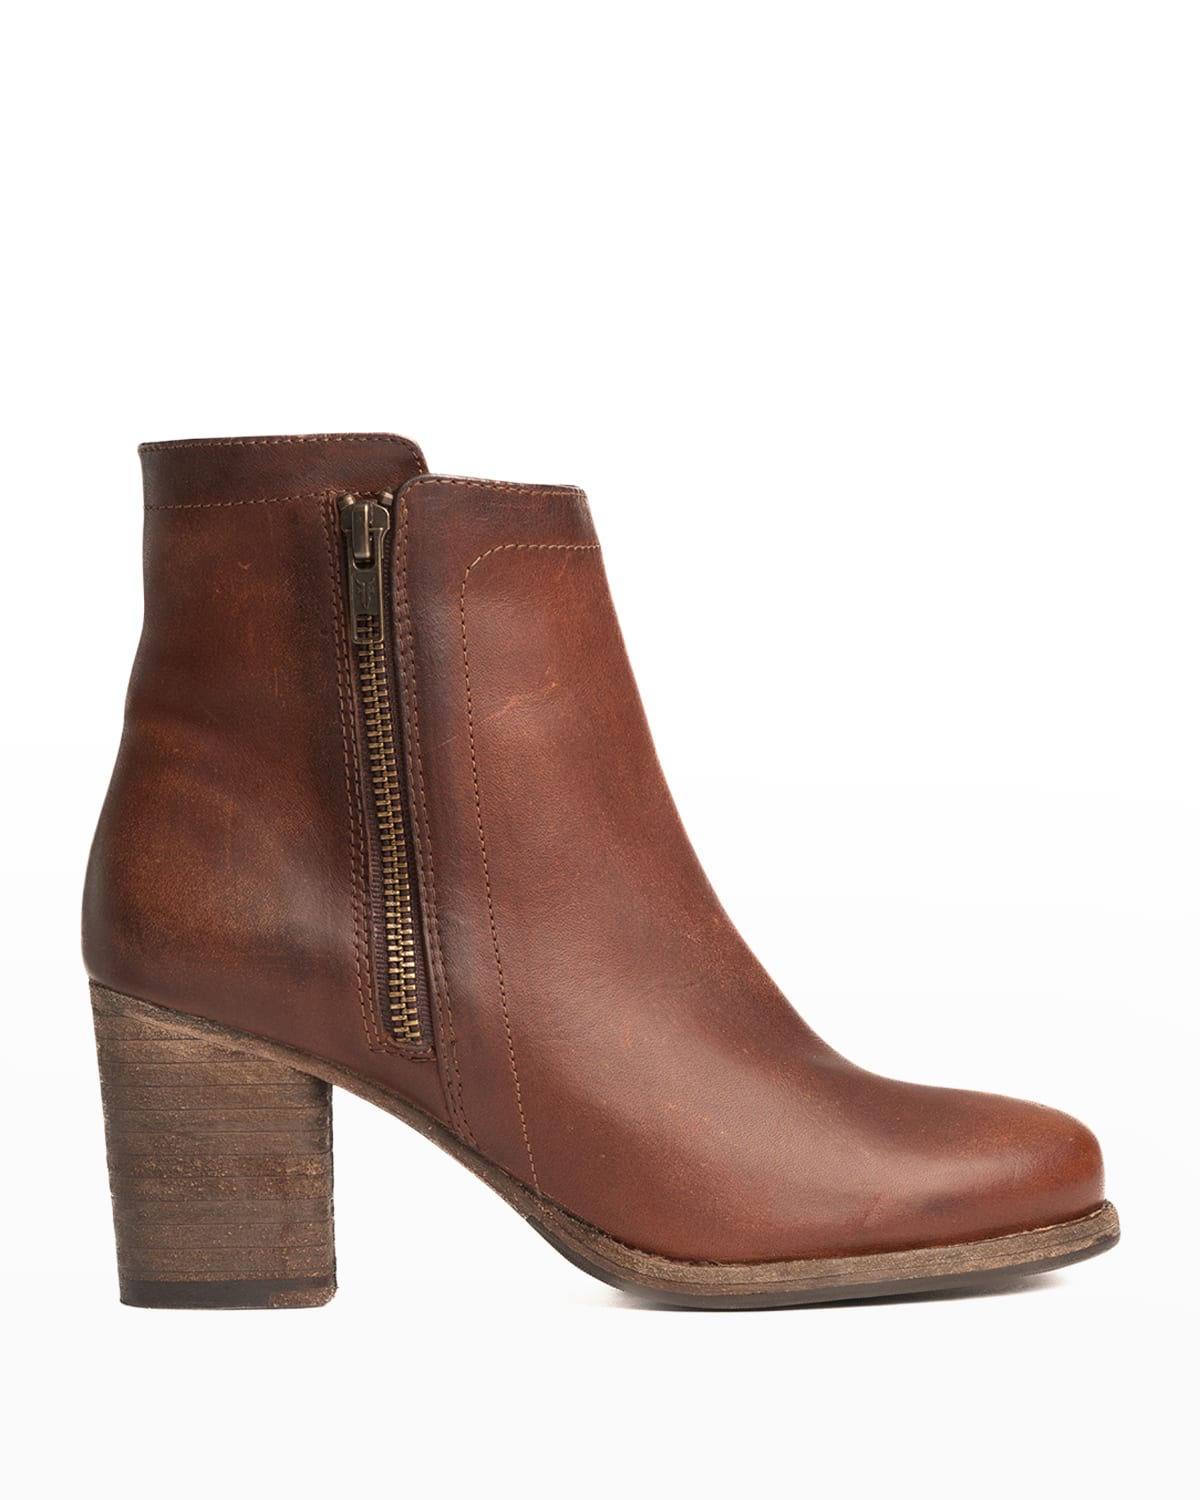 FRYE ADDIE LEATHER DUAL-ZIP ANKLE BOOTS